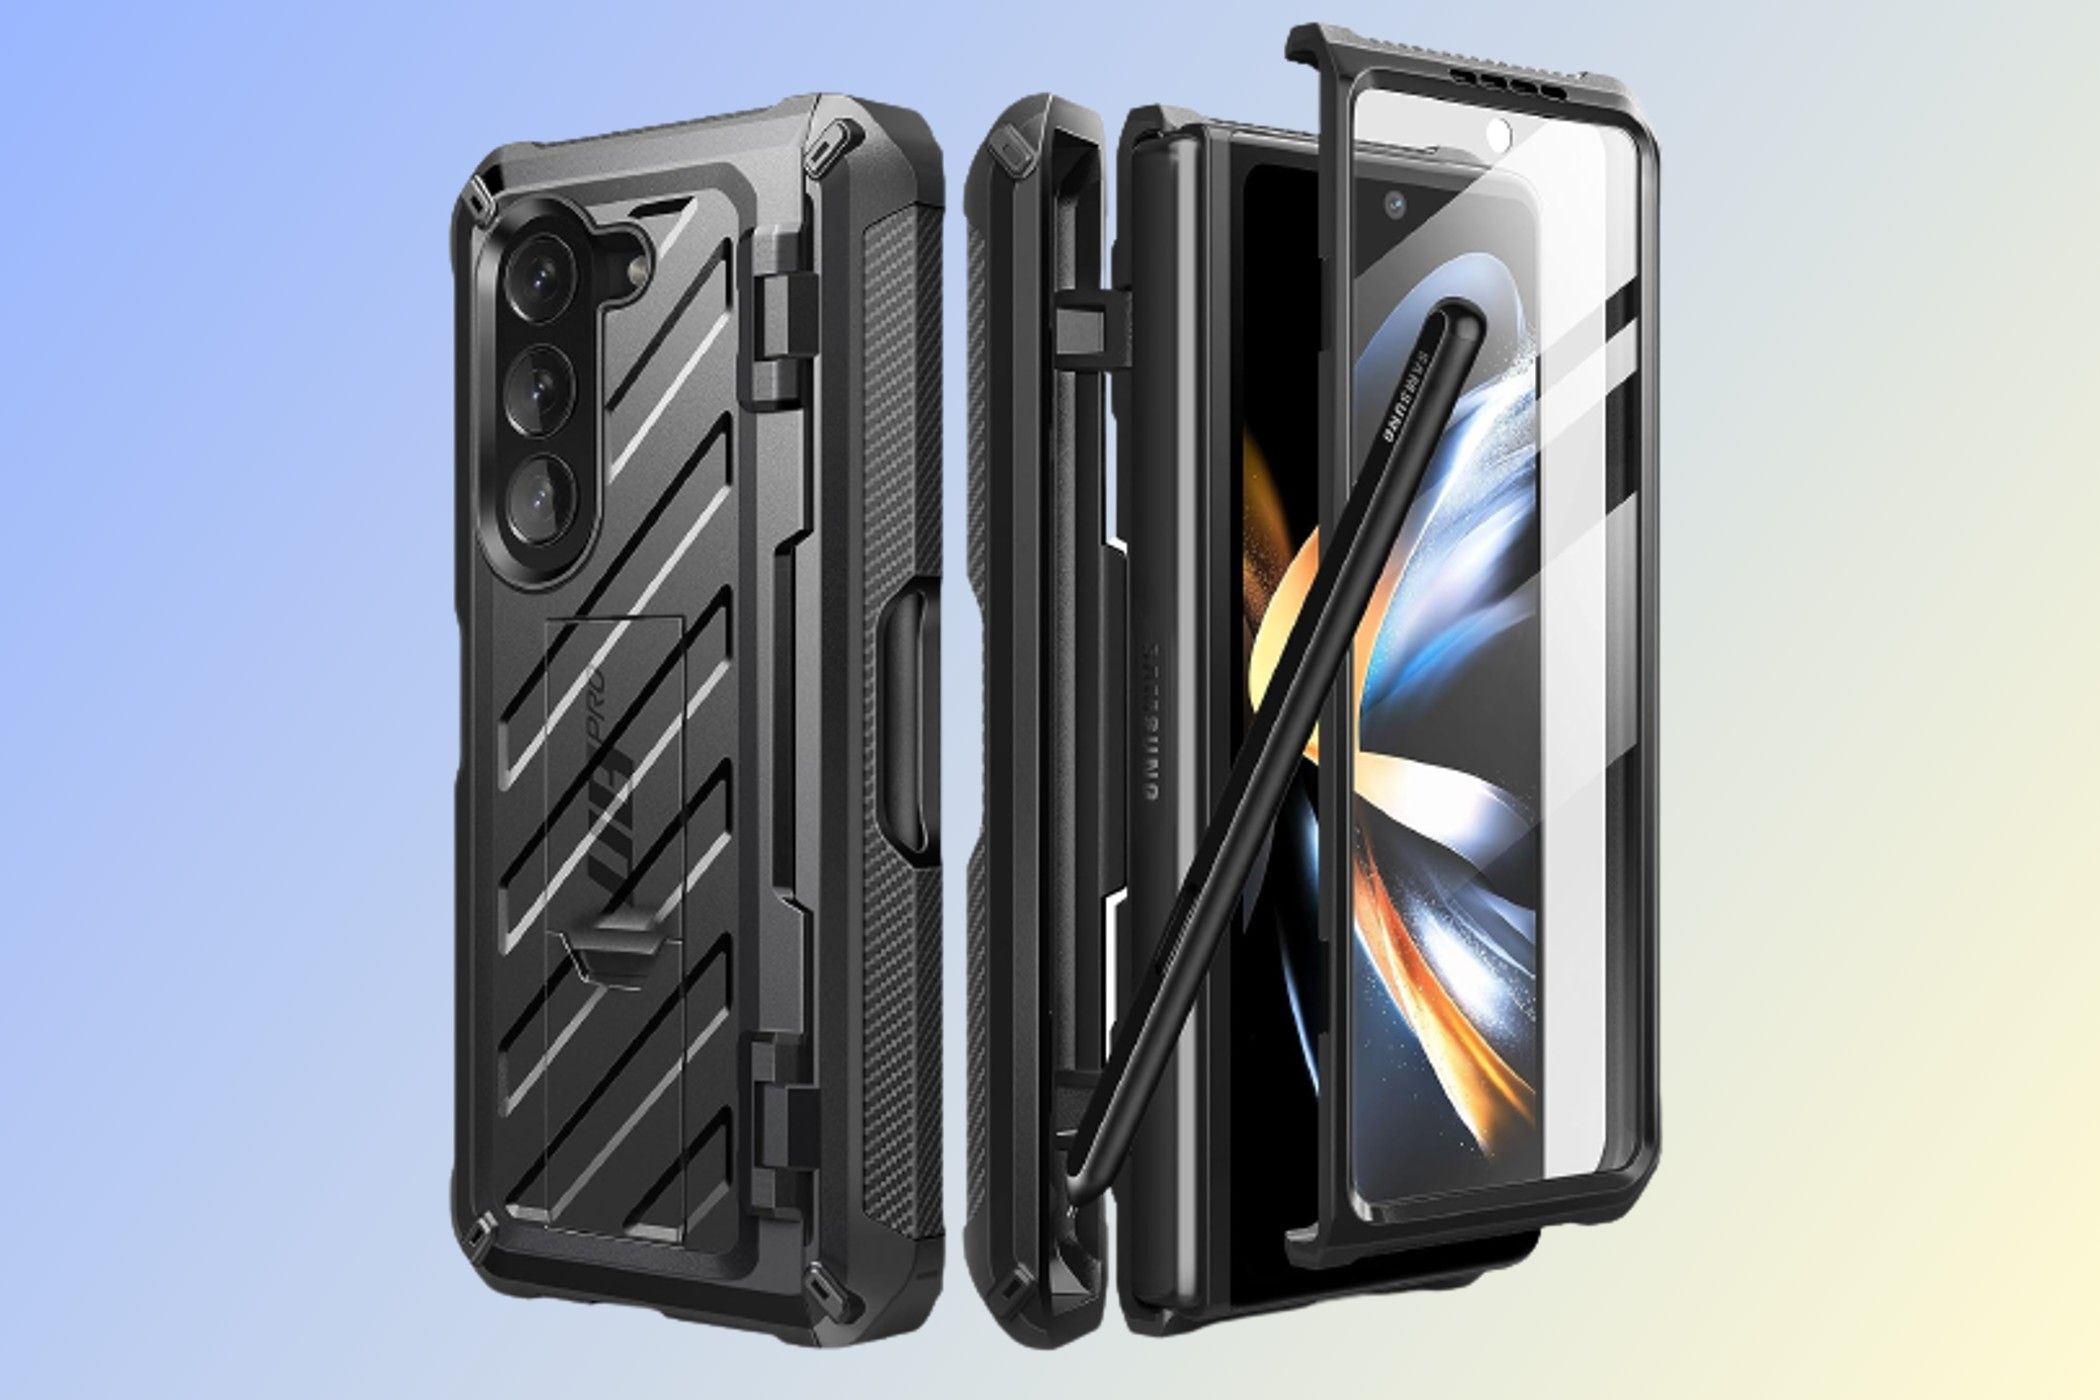 Case for Samsung Galaxy Z Fold 5 5G, with Detachable Magnetic S